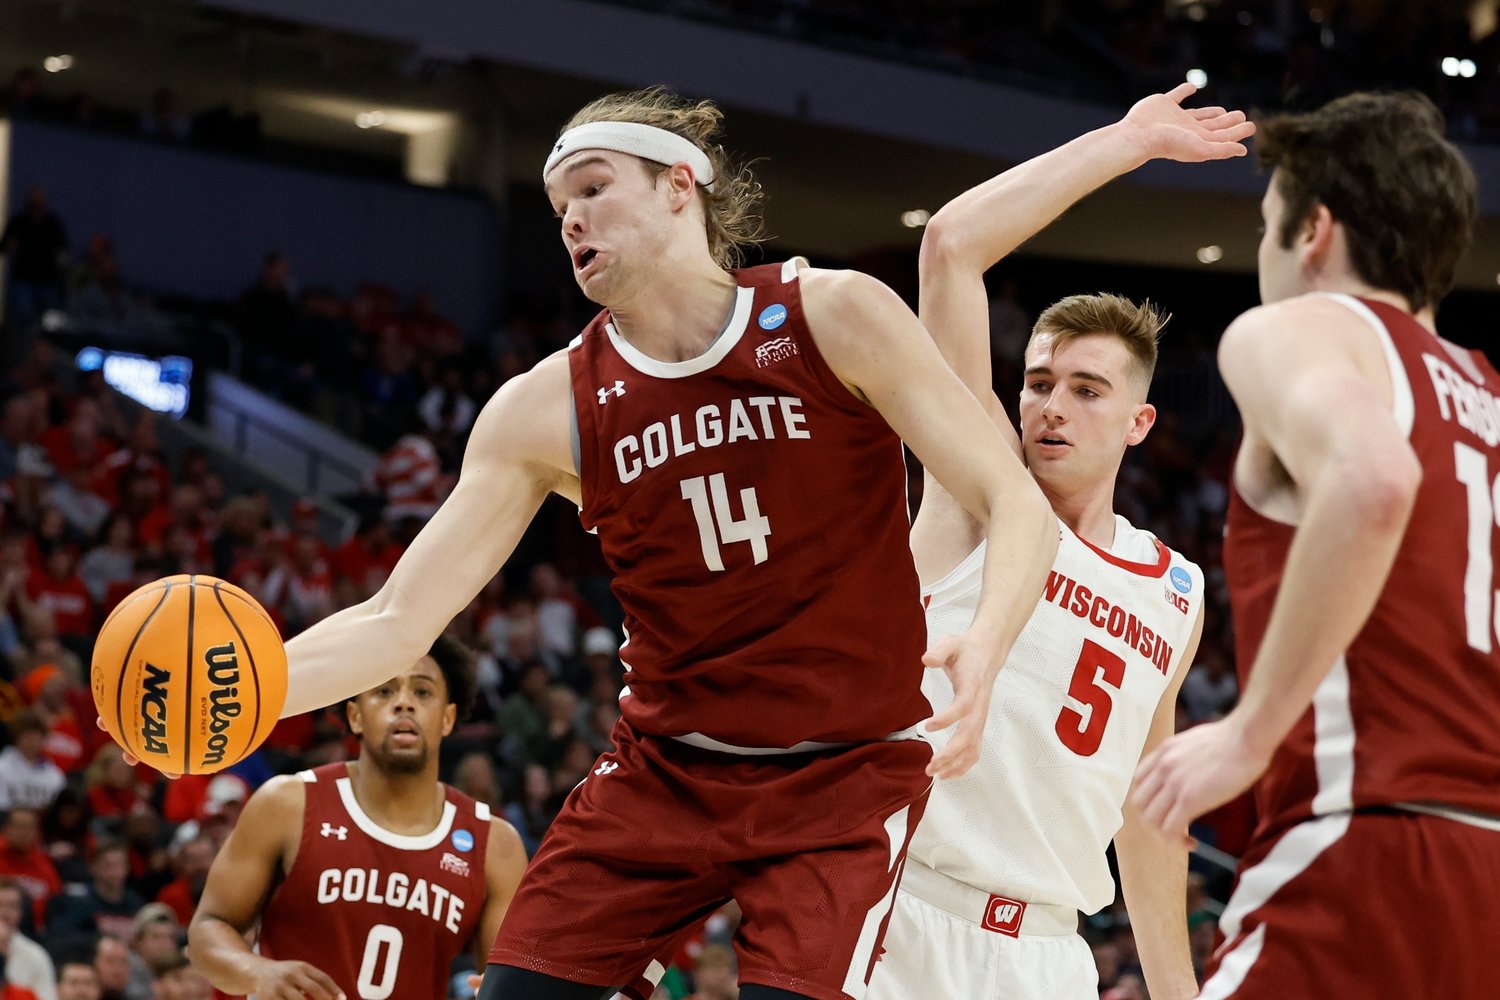 HUSTLE PLAY — Colgate's Keegan Records grabs a loose ball in front of Wisconsin's Tyler Wahl during during the first half of a first-round NCAA men's basketball tournament game on Friday night in Milwaukee.